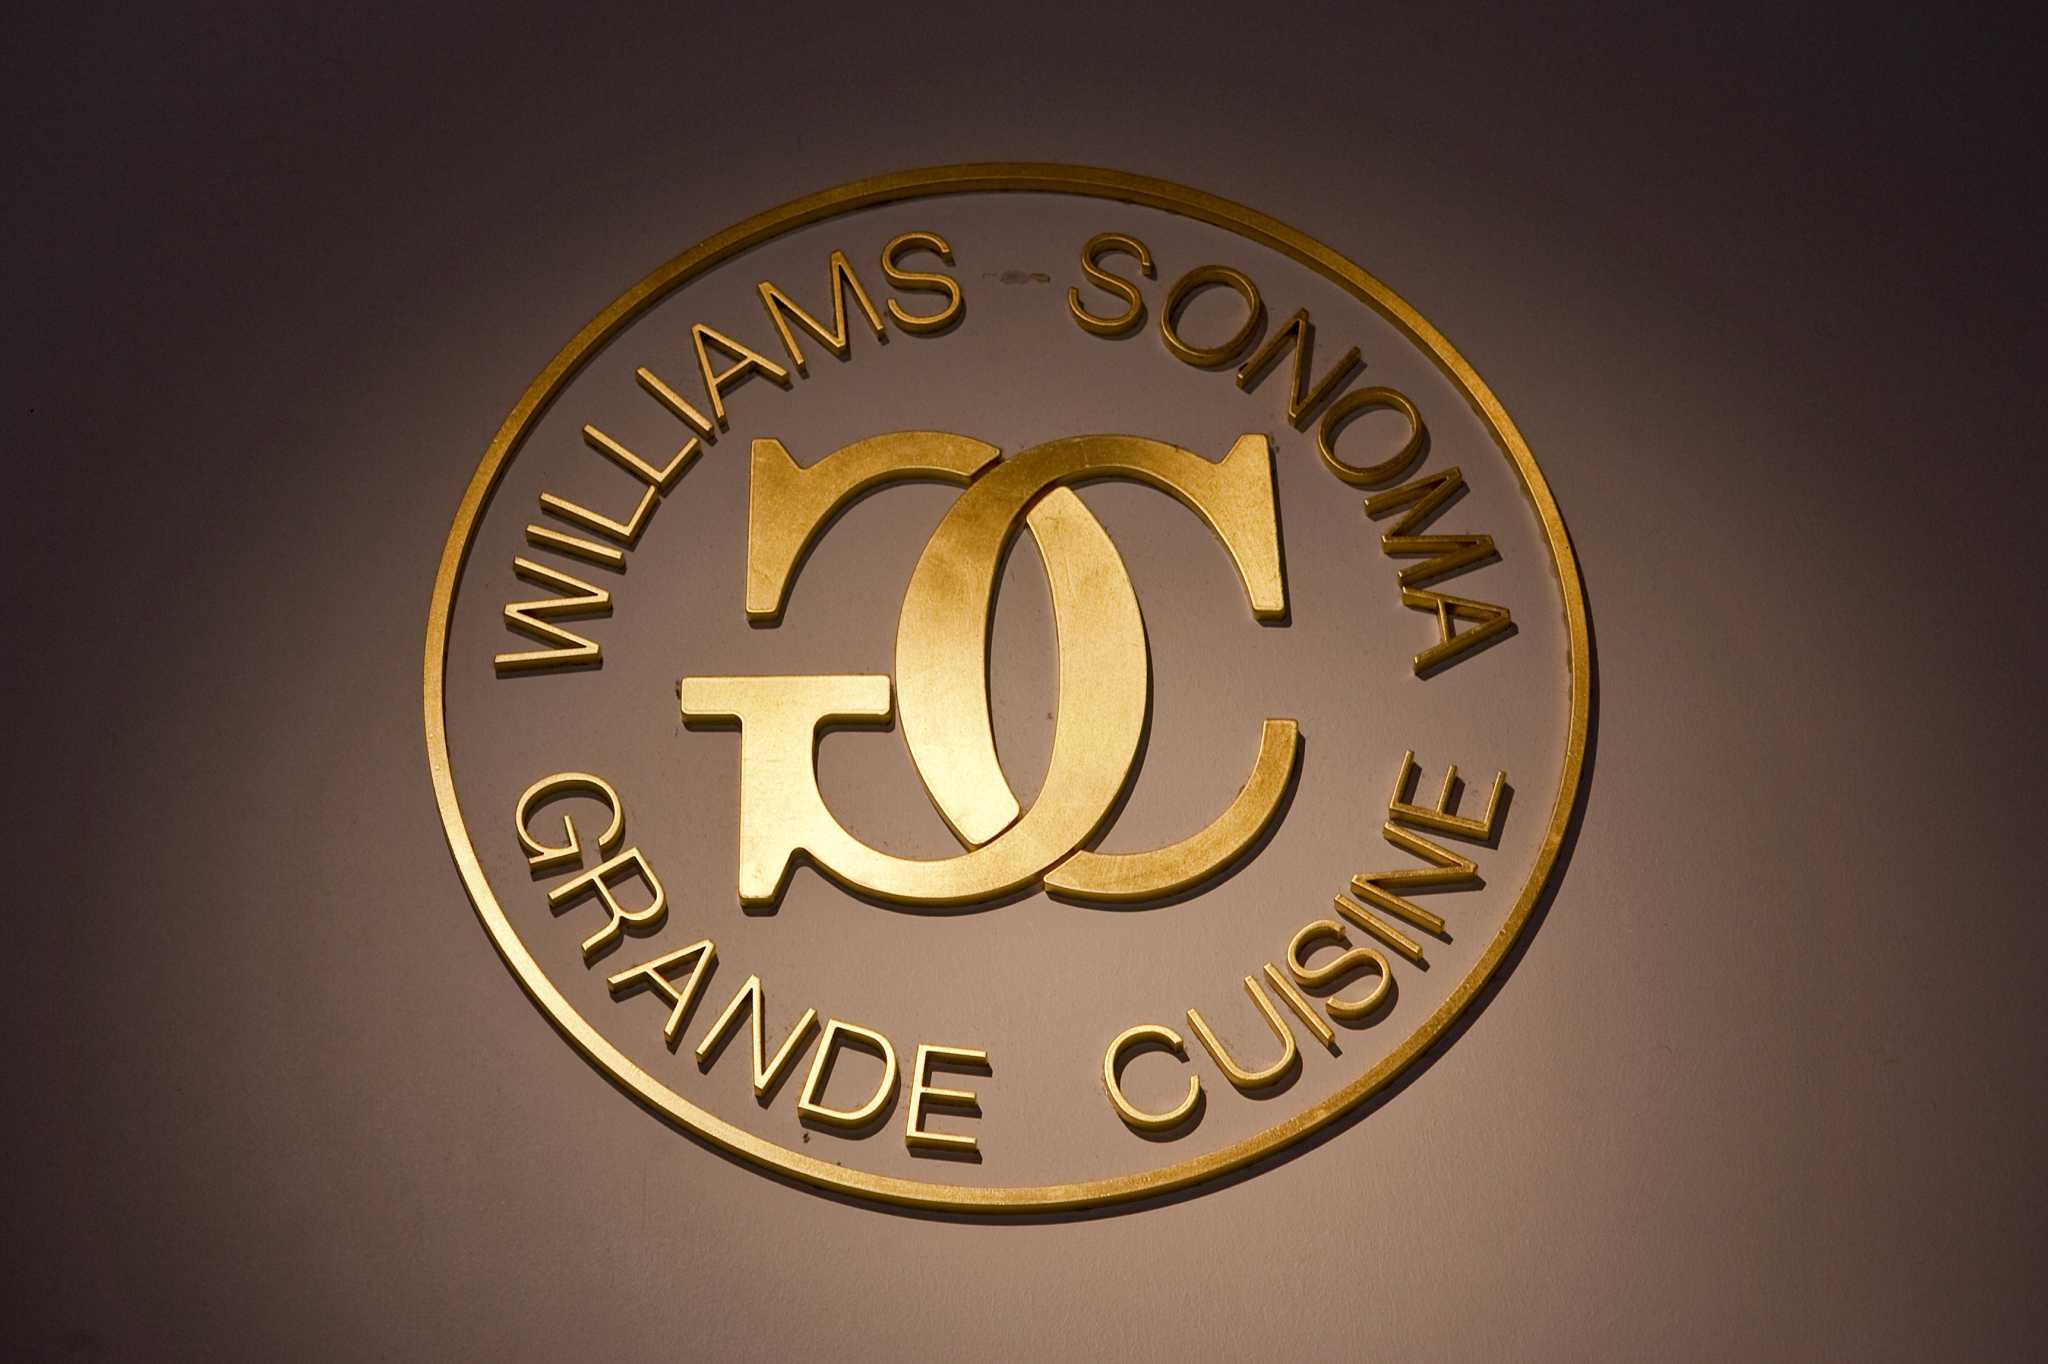 Williams-Sonoma is exiting S.F.’s Union Square. Chanel is moving in